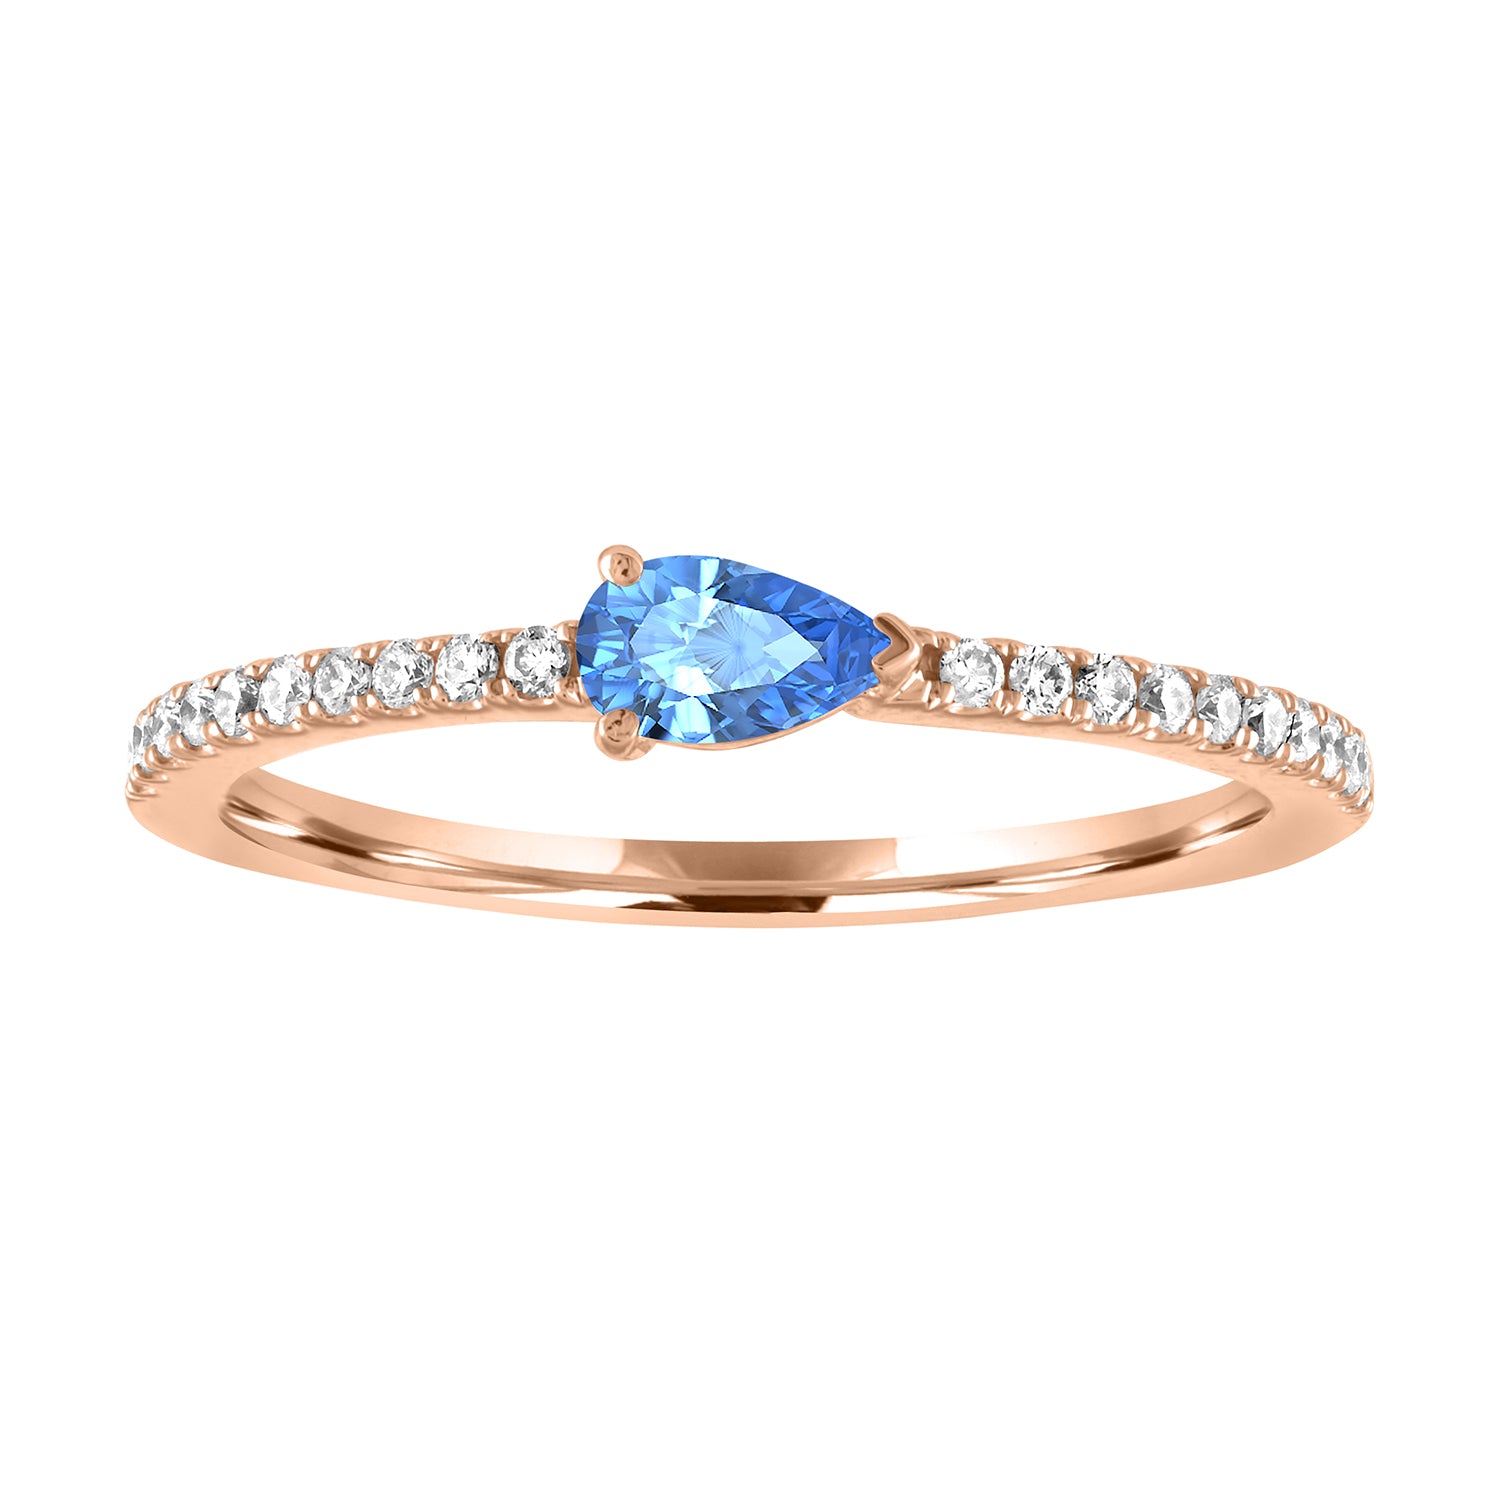 Rose gold skinny band with a pear shaped blue topaz in the center and round diamonds on the shank. 